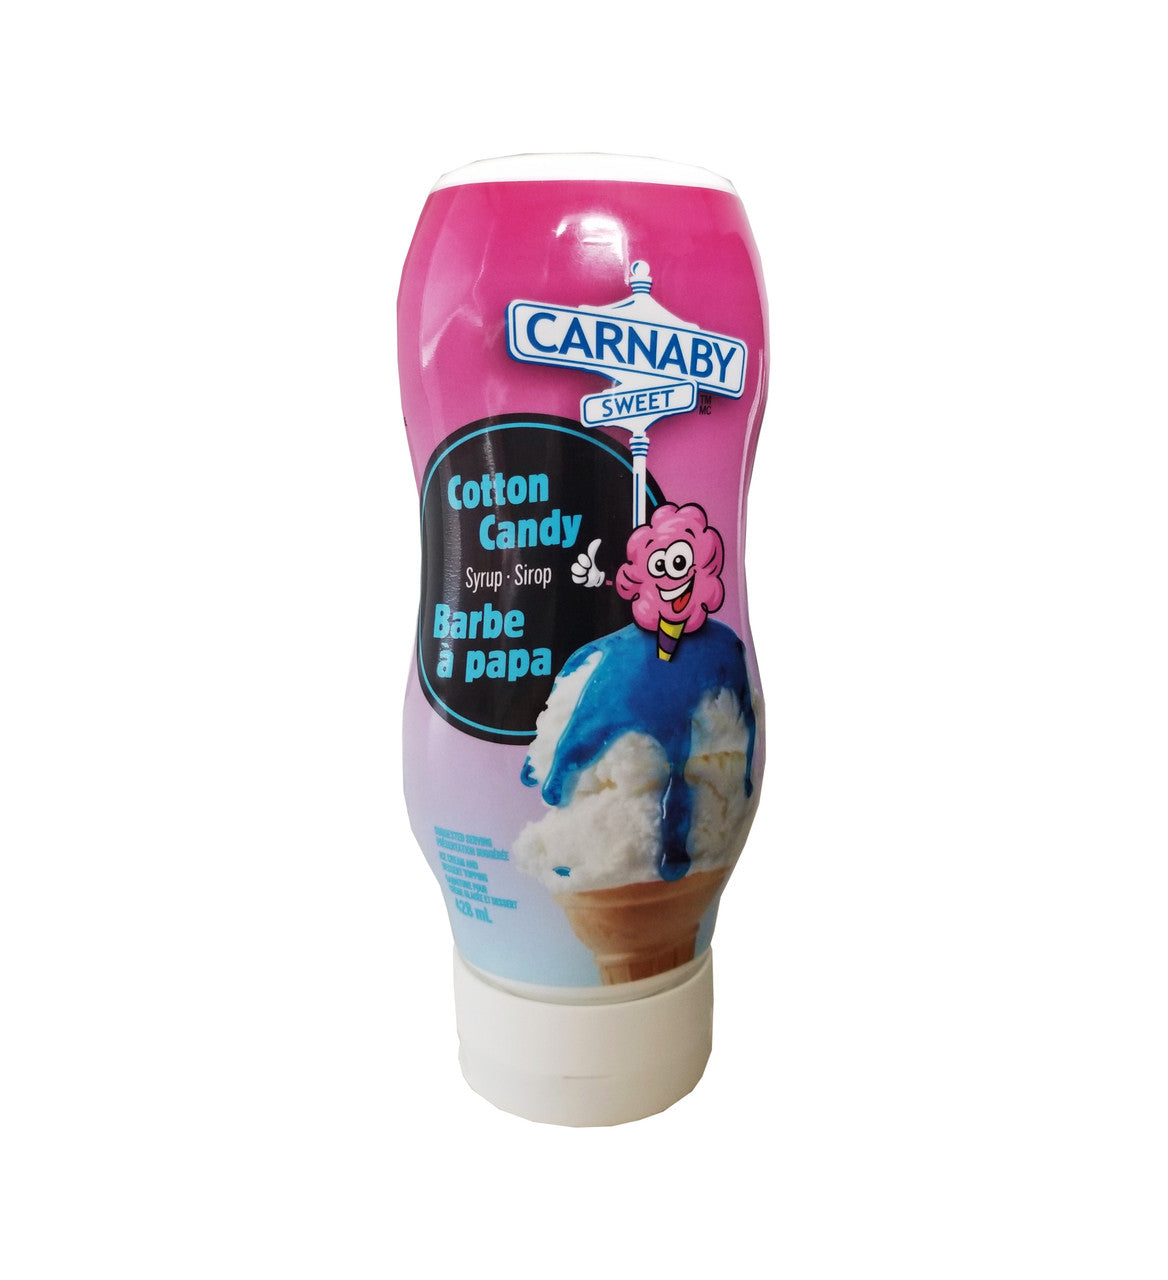 Carnaby Sweet Cotton Candy Syrup 428mL/14.5 fl. oz. {Imported from Canada}